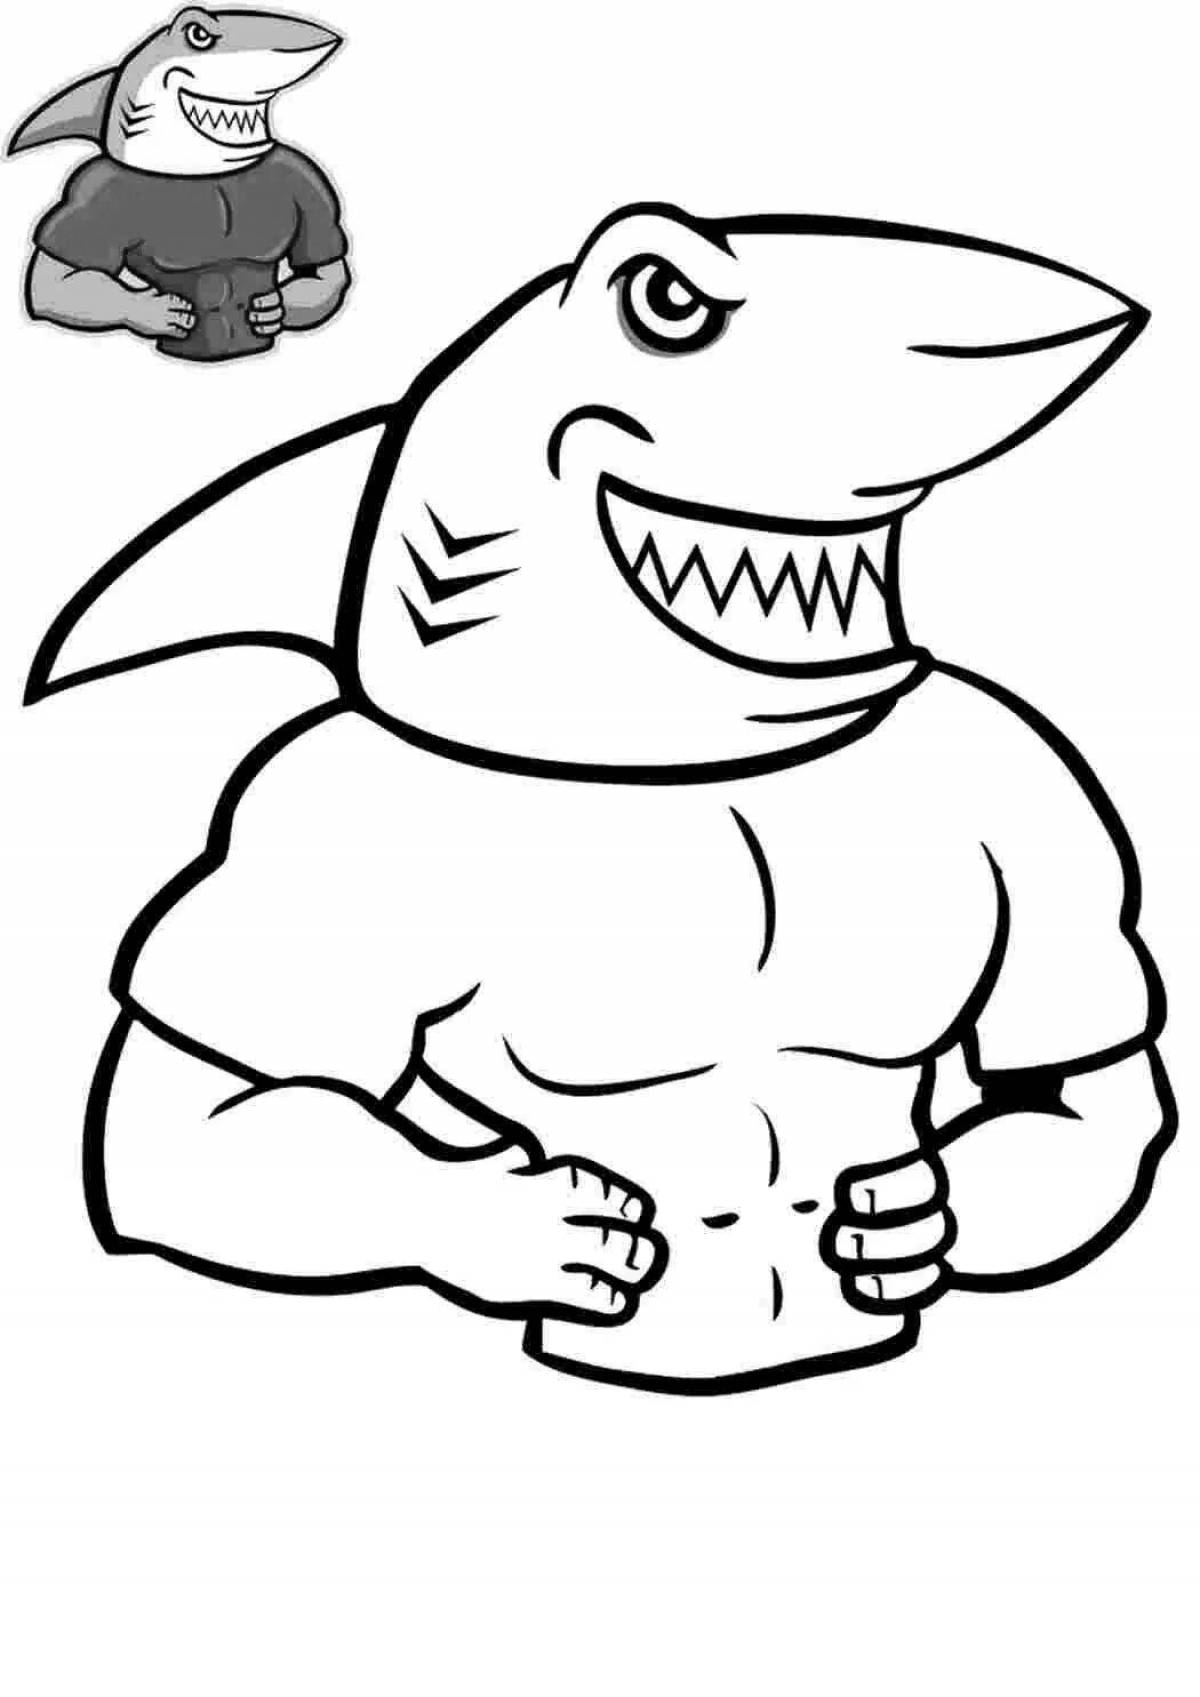 Color Explosive Robot Shark Coloring Page